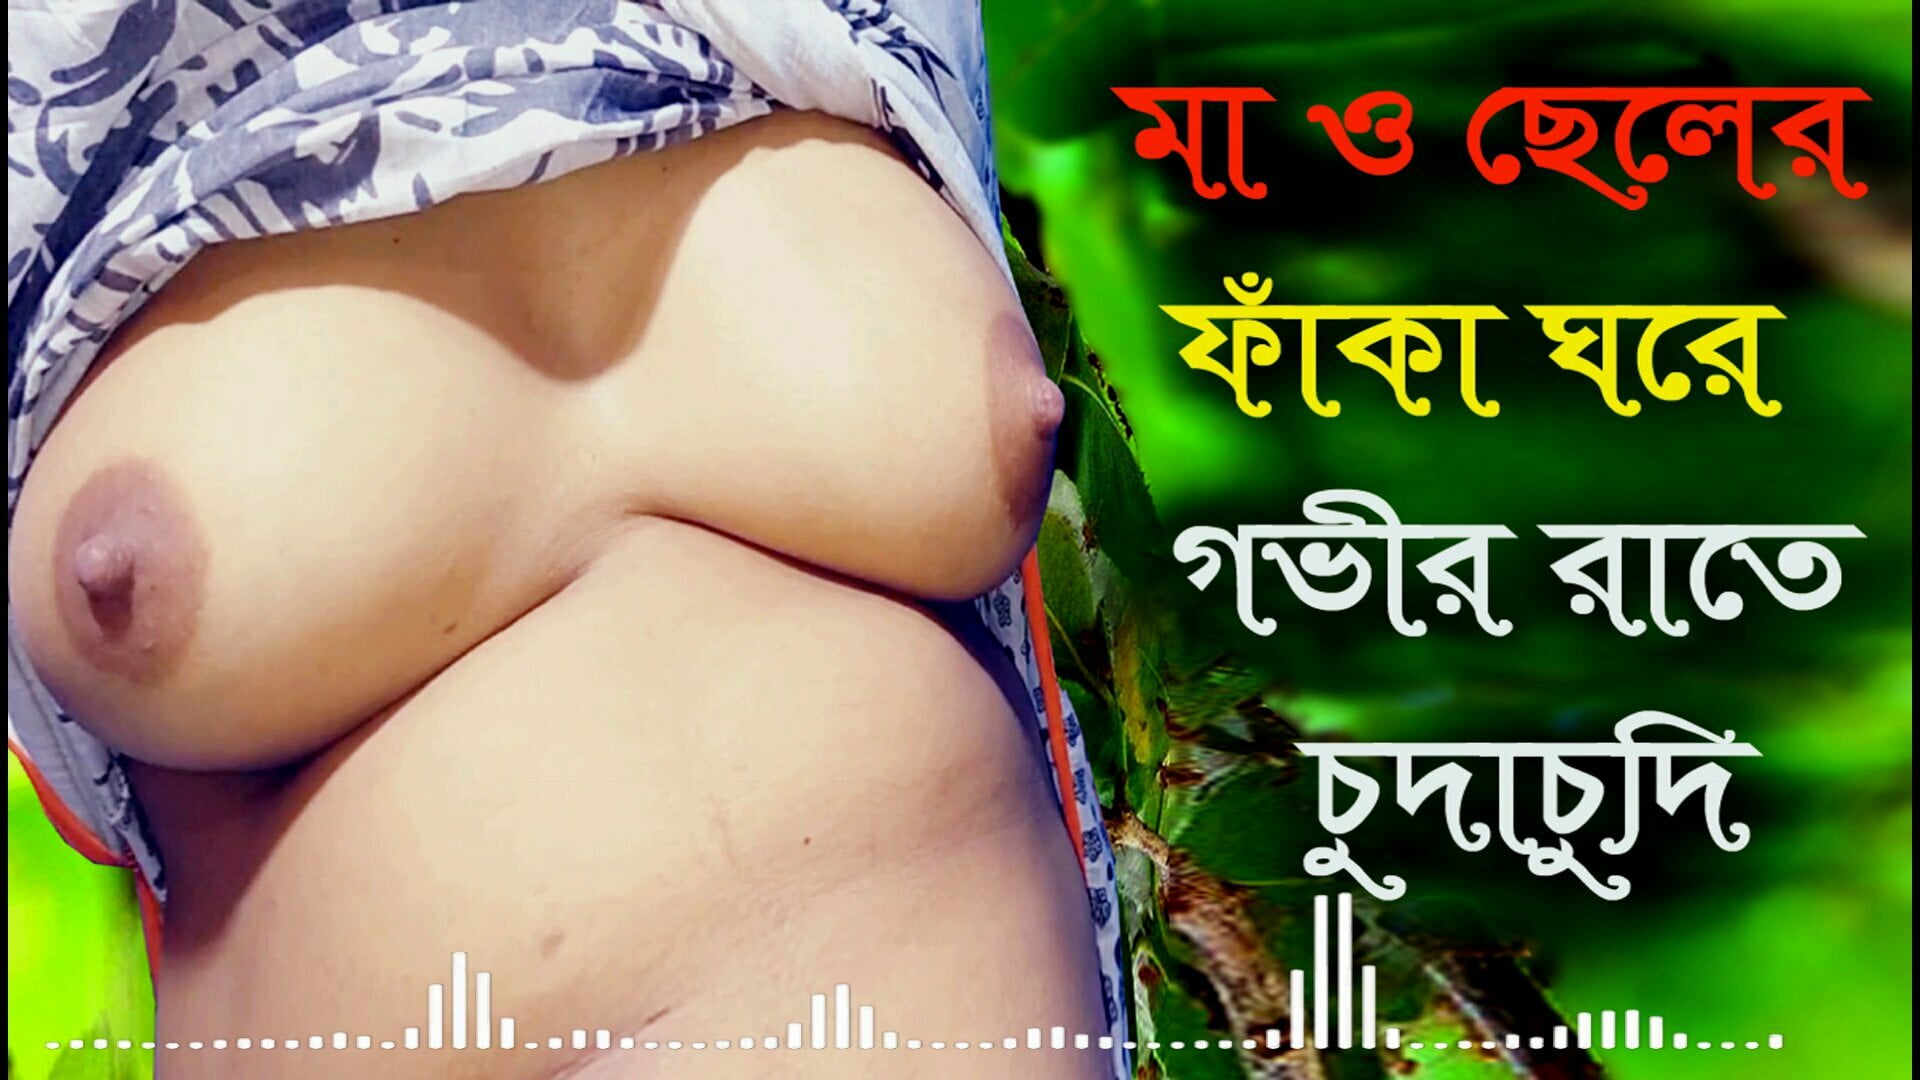 New sex story in bengali